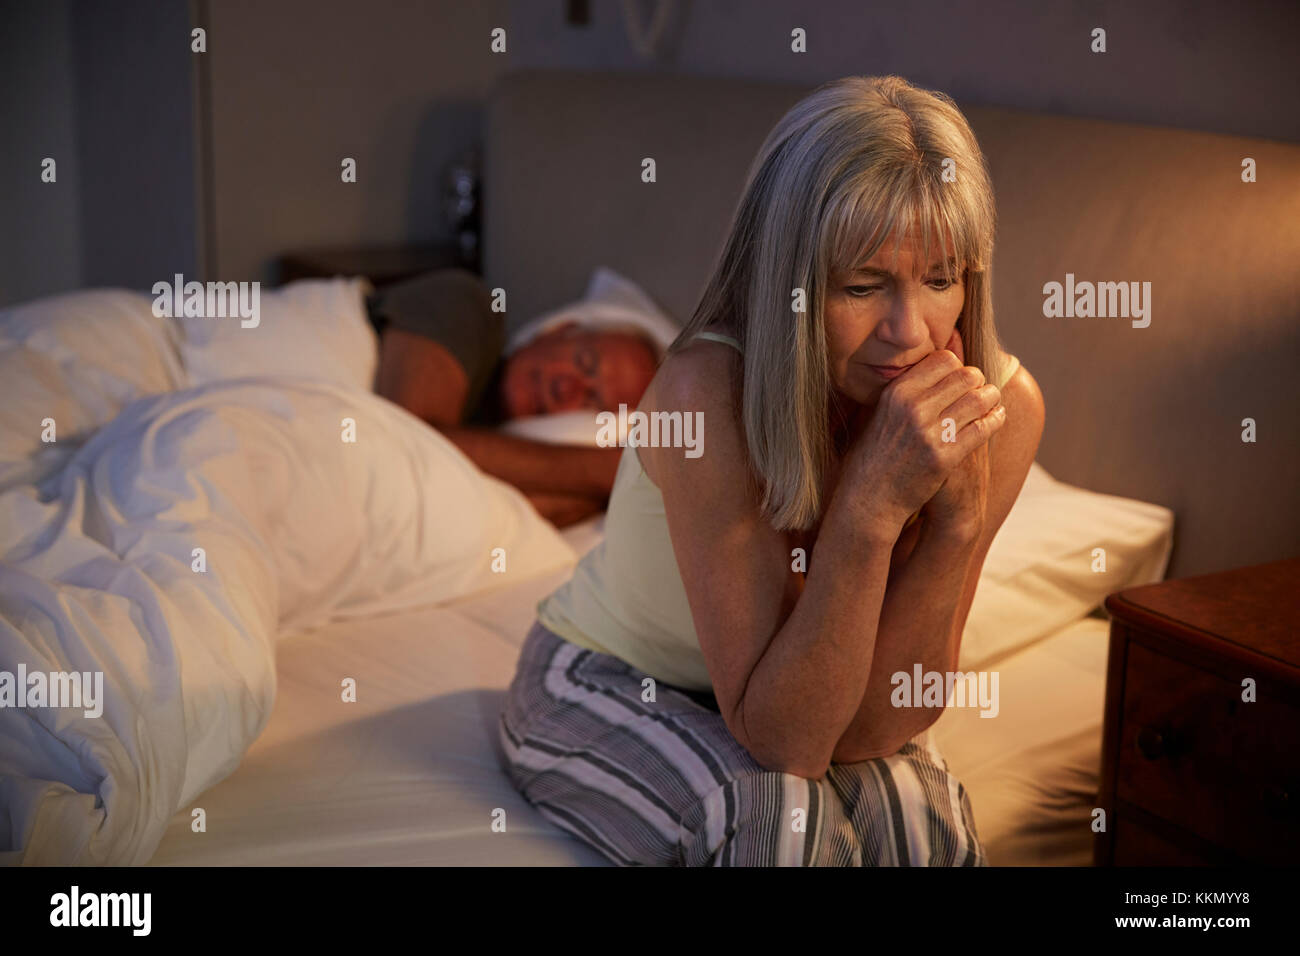 Worried Senior Woman In Bed At Night Suffering With Insomnia Stock Photo